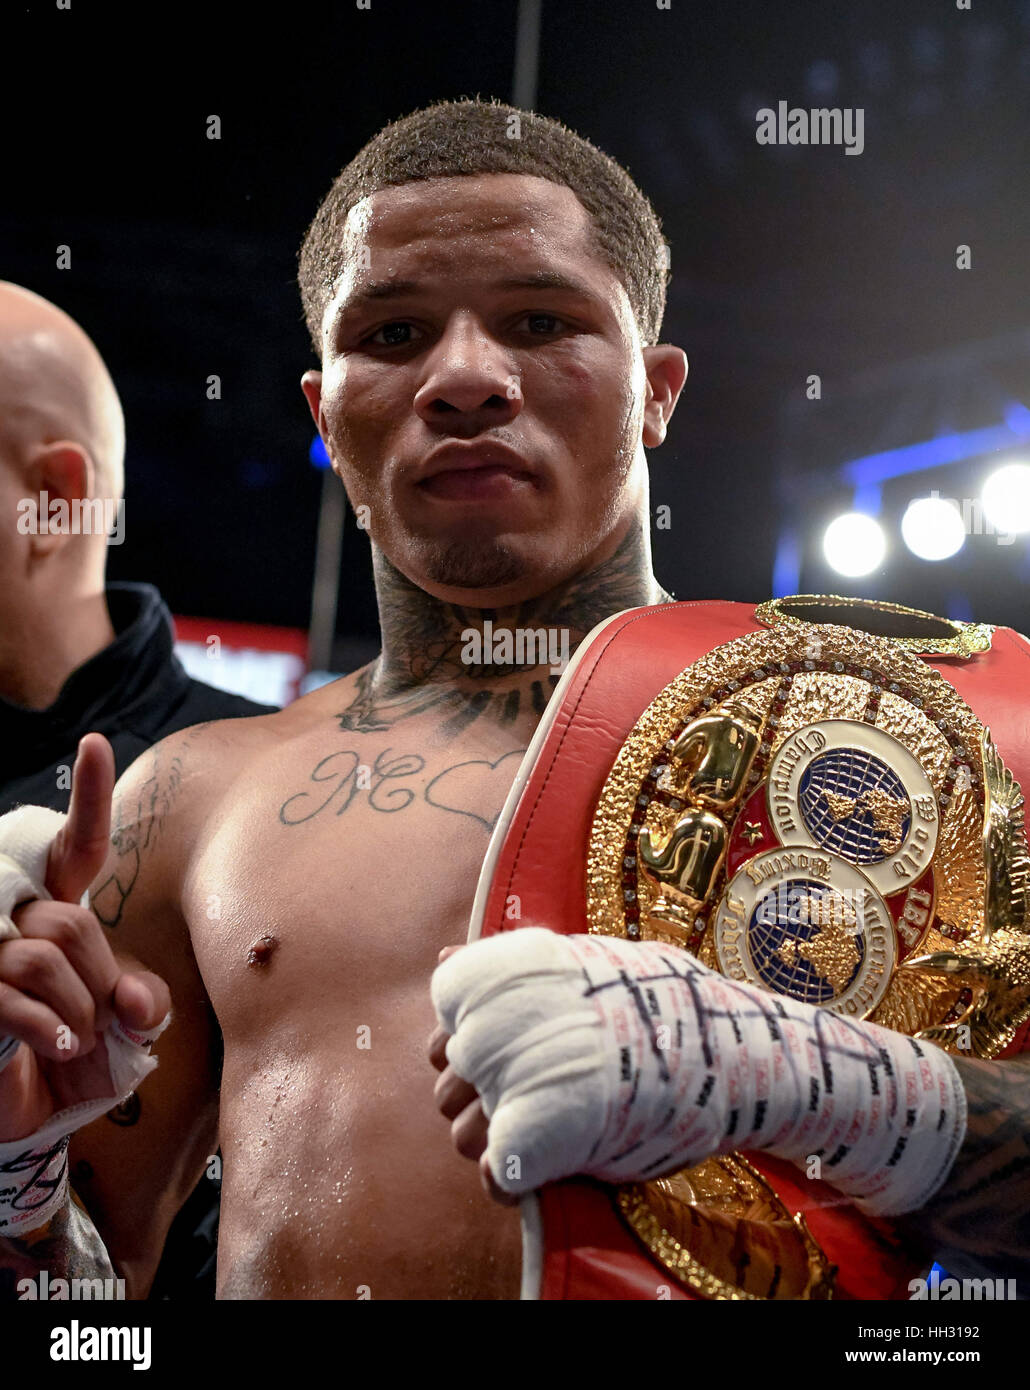 Brooklyn, New York, USA. 14th Jan, 2017. Gervonta Davisposes after defeating Jose Pedraza in a junior lightweight championship bout at the Barclays Center in Brooklyn, New York. Credit: Joel Plummer/ZUMA Wire/Alamy Live News Stock Photo